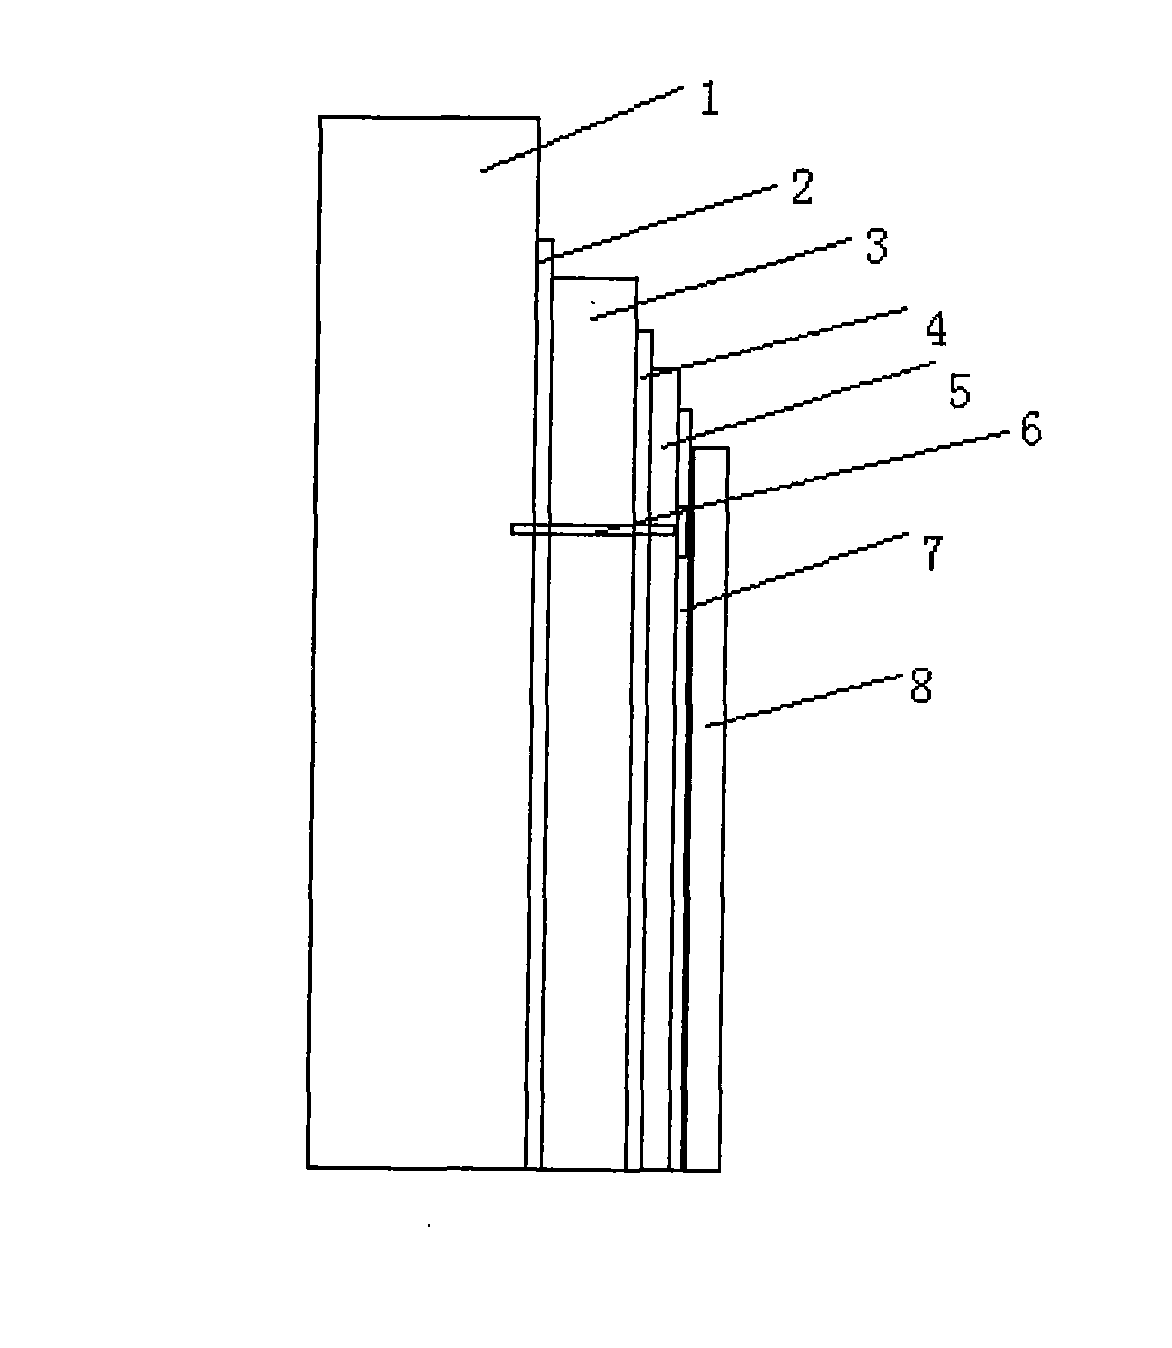 External insulating system for thinly plastered external wall of extruded polystyrene board